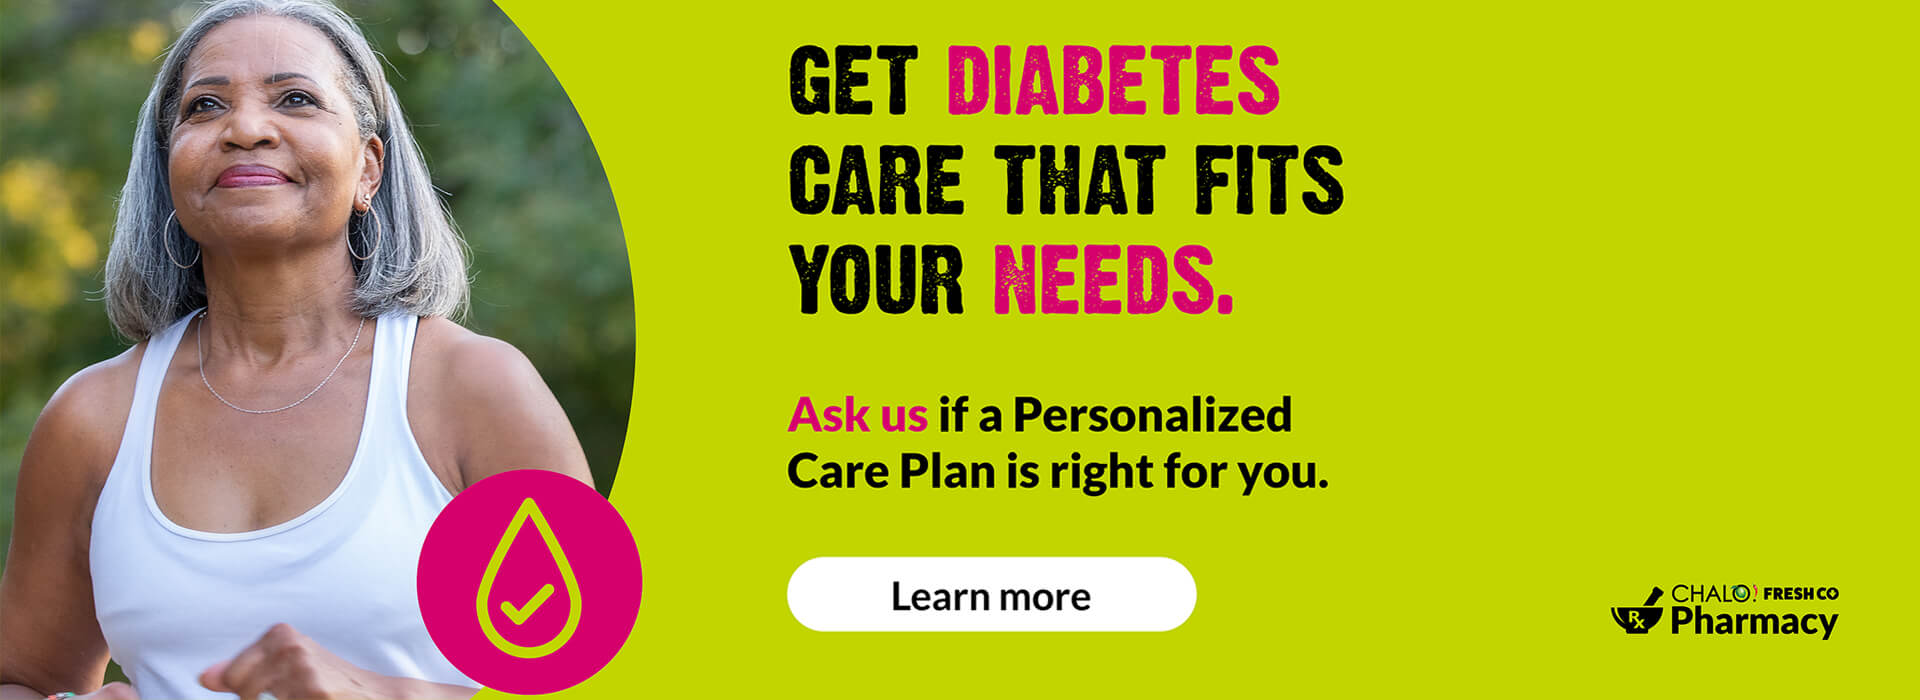 Text Reading, “Get Diabetes Care That Fits Your Needs. Ask us if a Personalized Care Plan is Right For You. Know details with the ‘Learn More’ Button. A logo of Chalo Freshco Pharmacy at the bottom right”